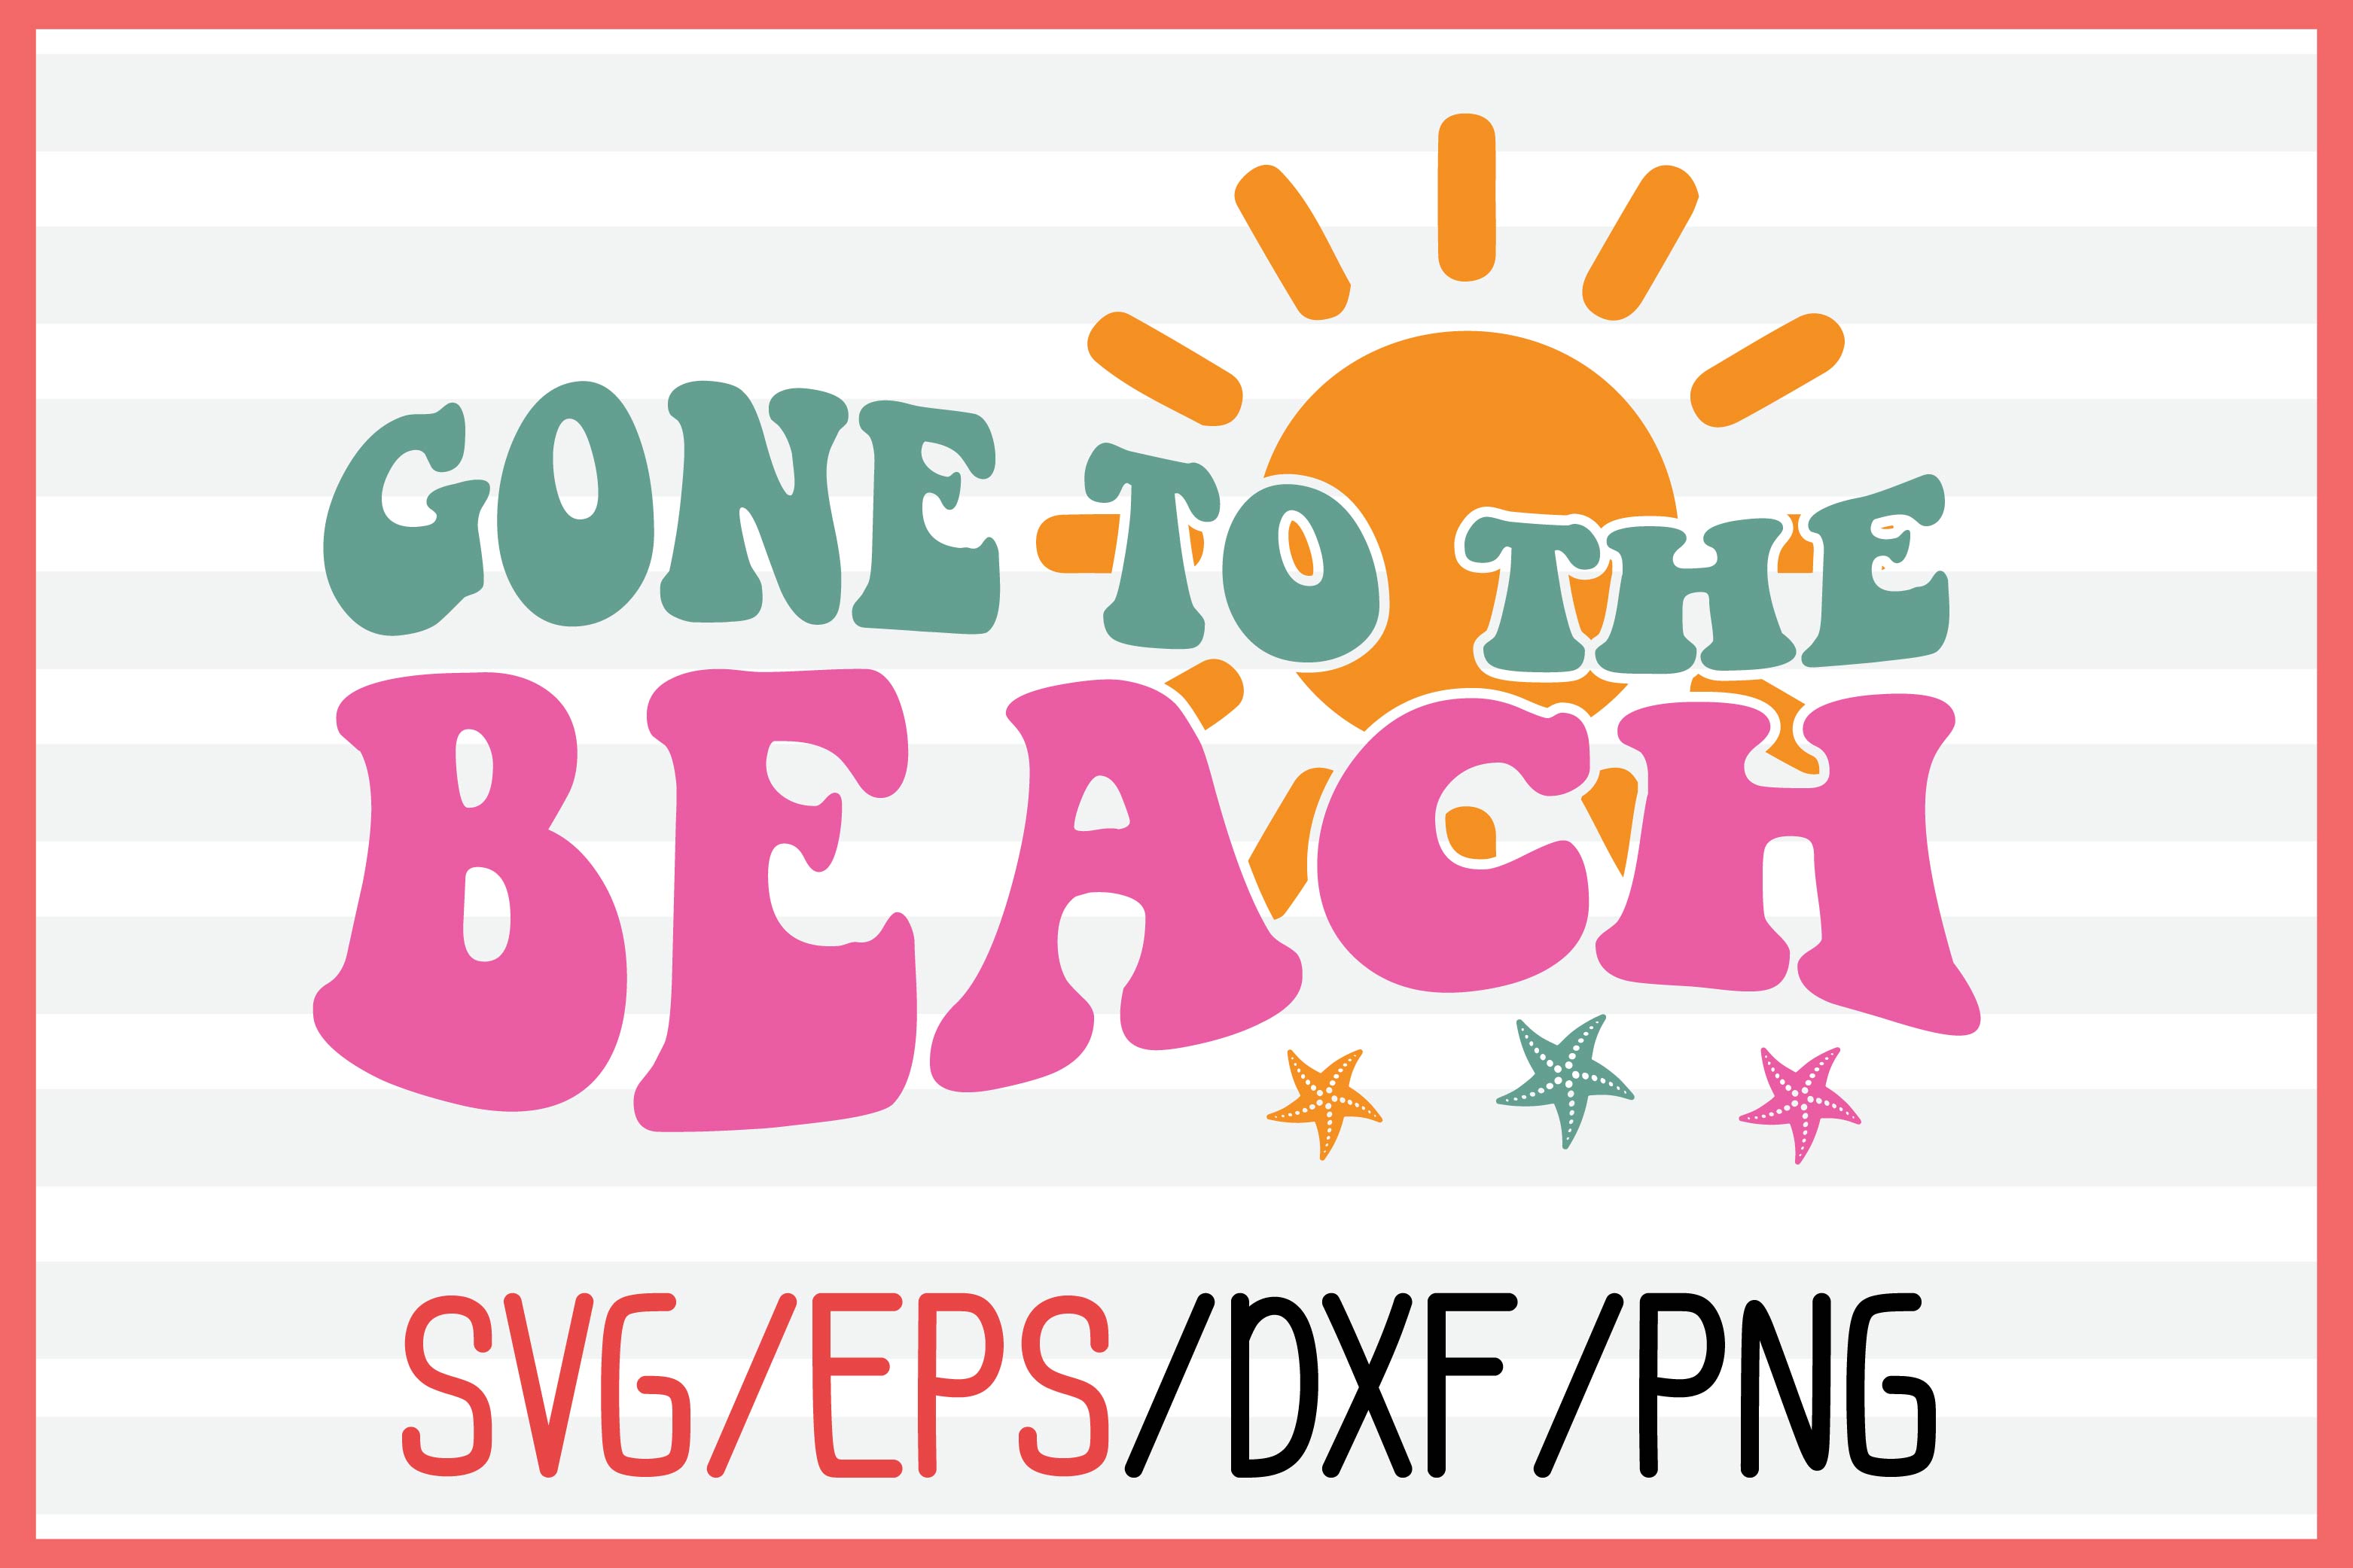 gone to the beach retro svg design pinterest preview image.